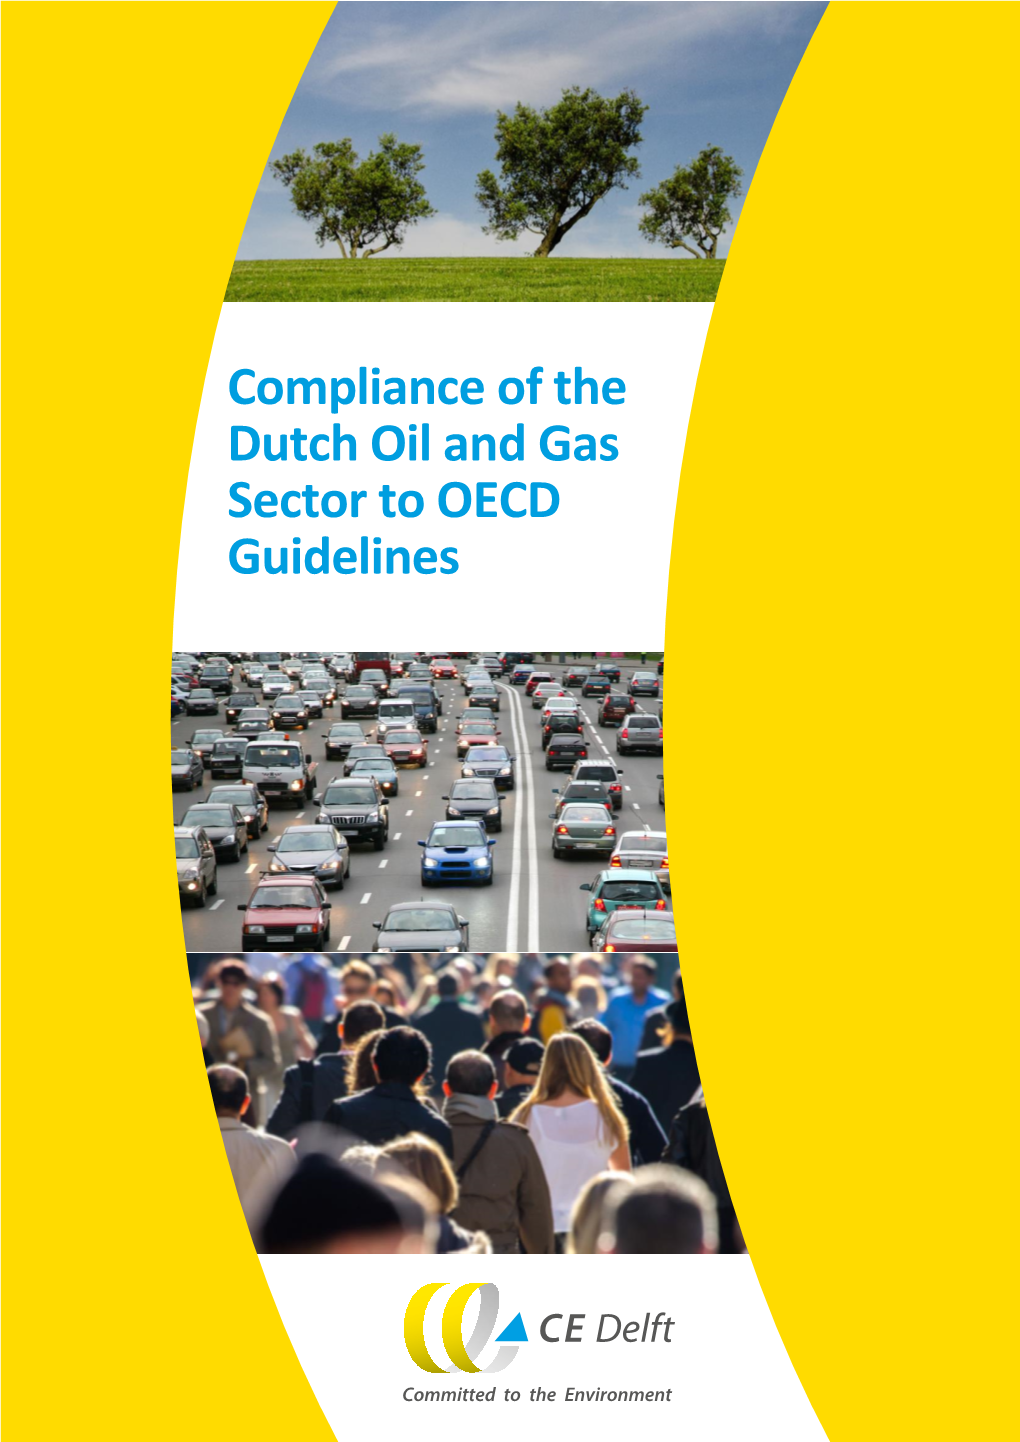 Compliance of the Dutch Oil and Gas Sector to OECD Guidelines